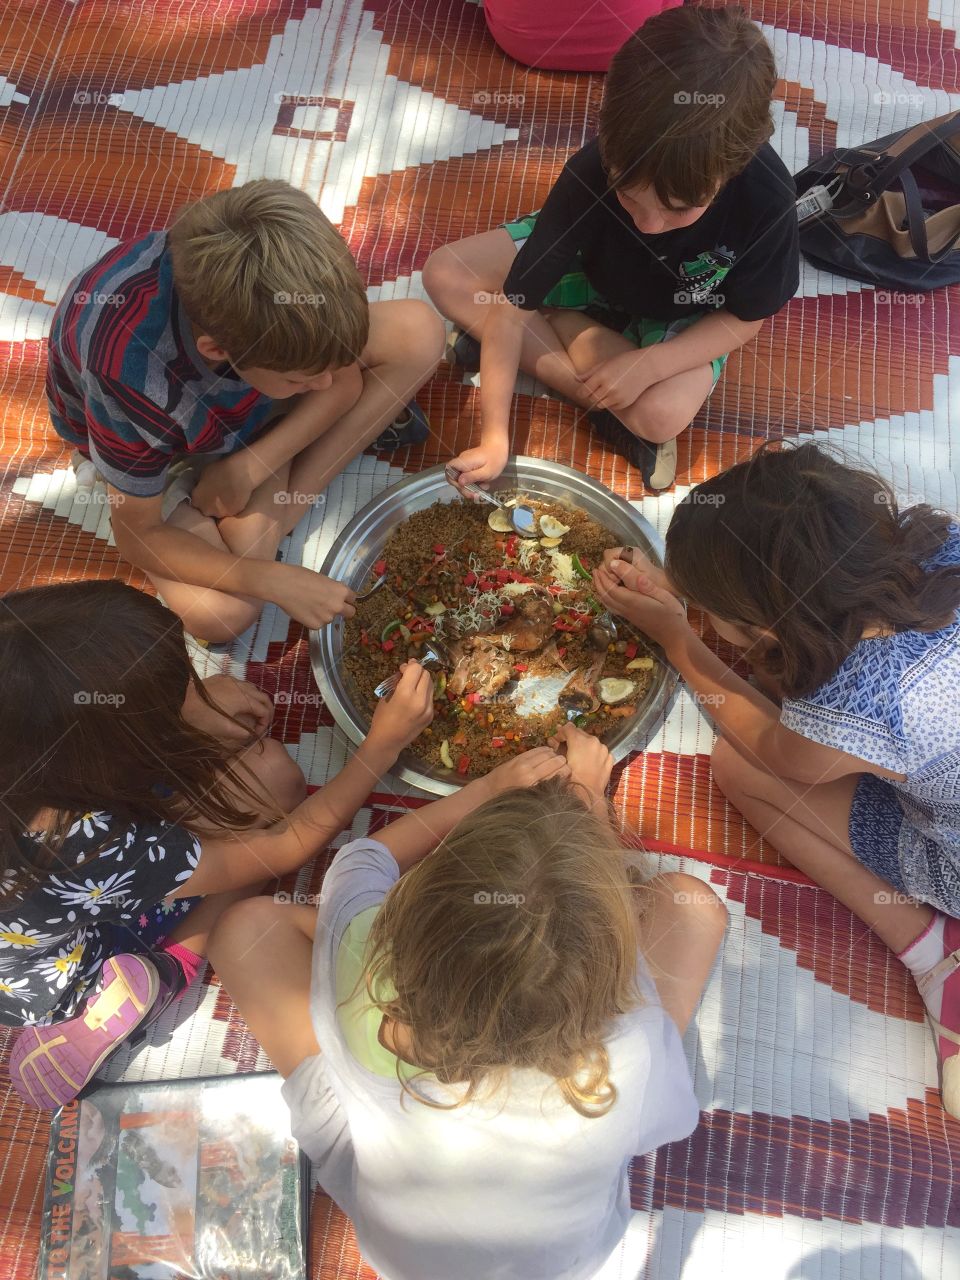 Children sharing a plate of food